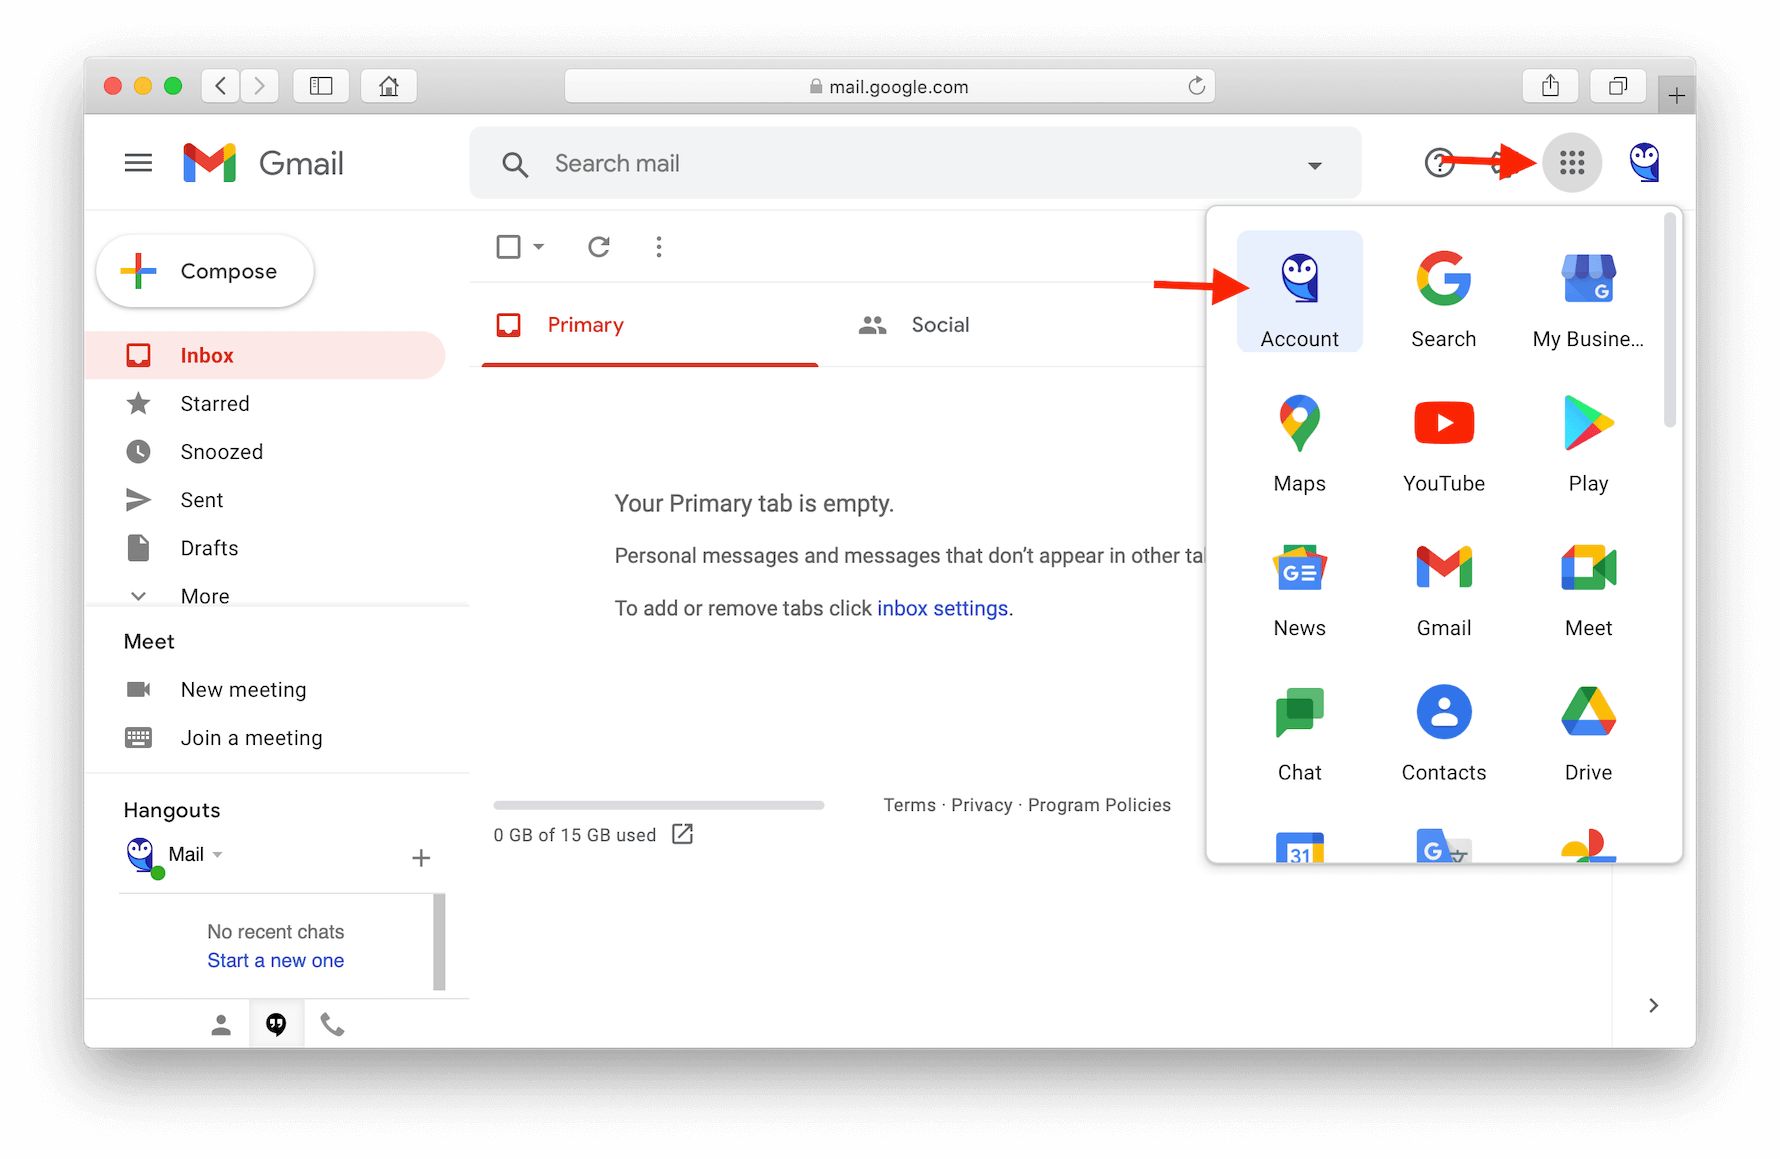 Login to your Gmail account and go to the account settings